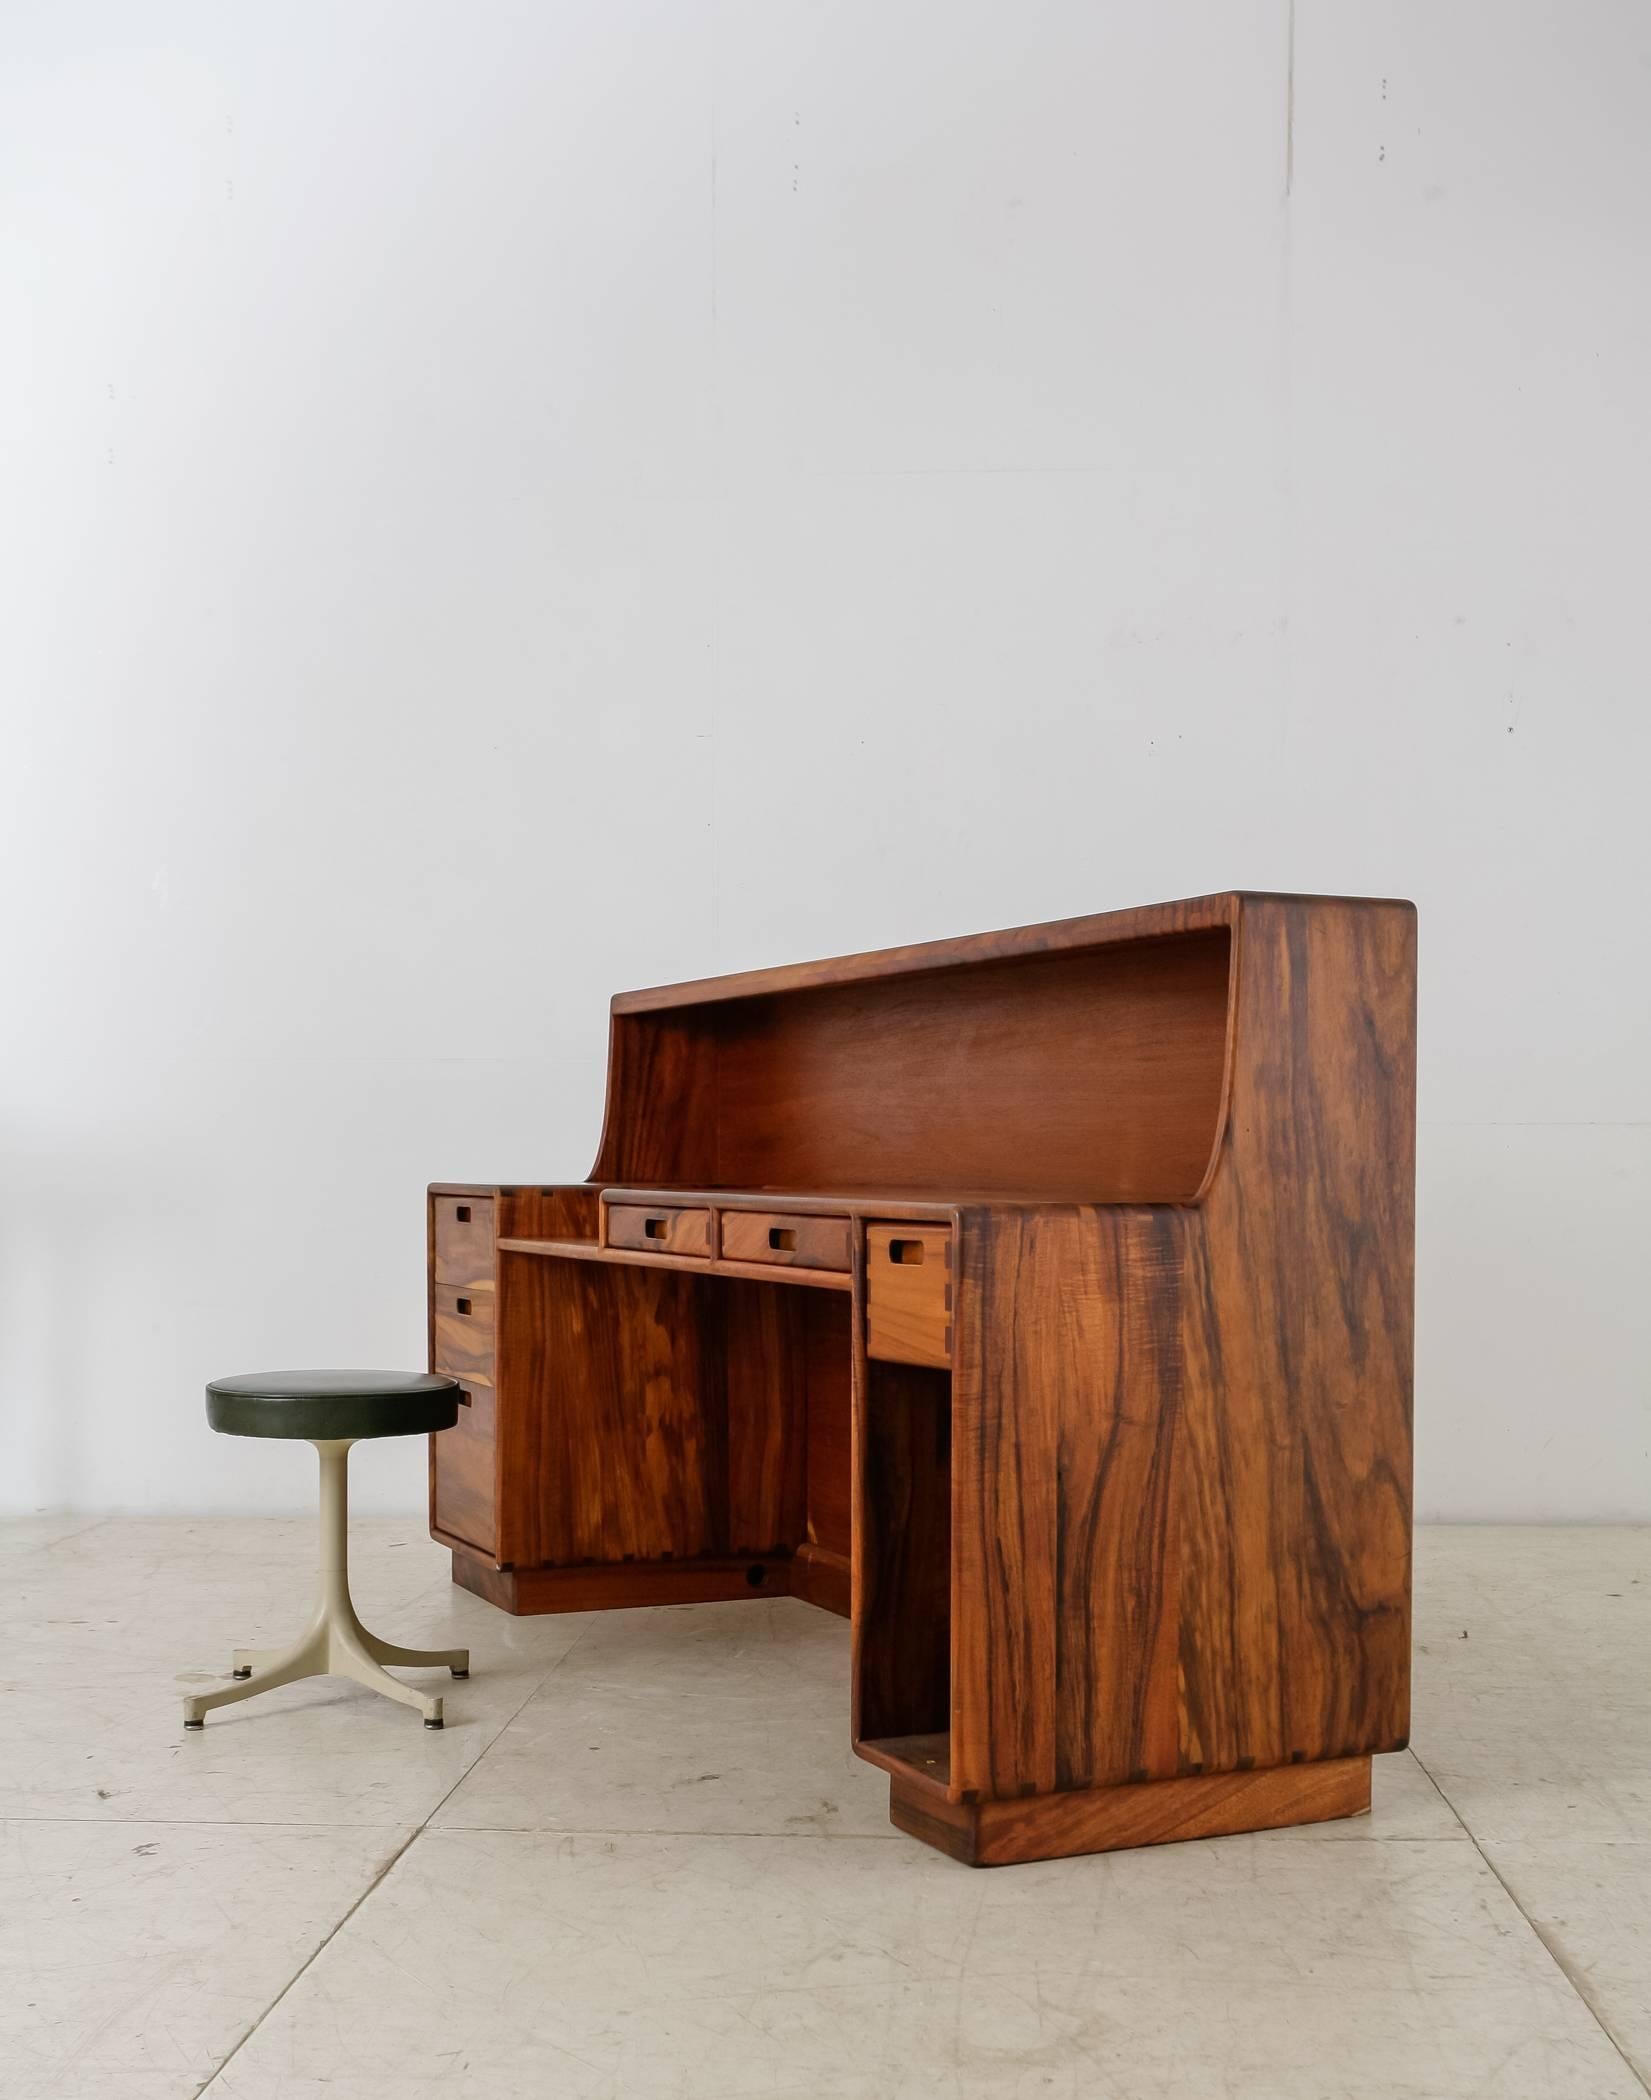 American Unique and Large Jim Sweeney Wooden Studio Craft Desk, USA, 1970s For Sale